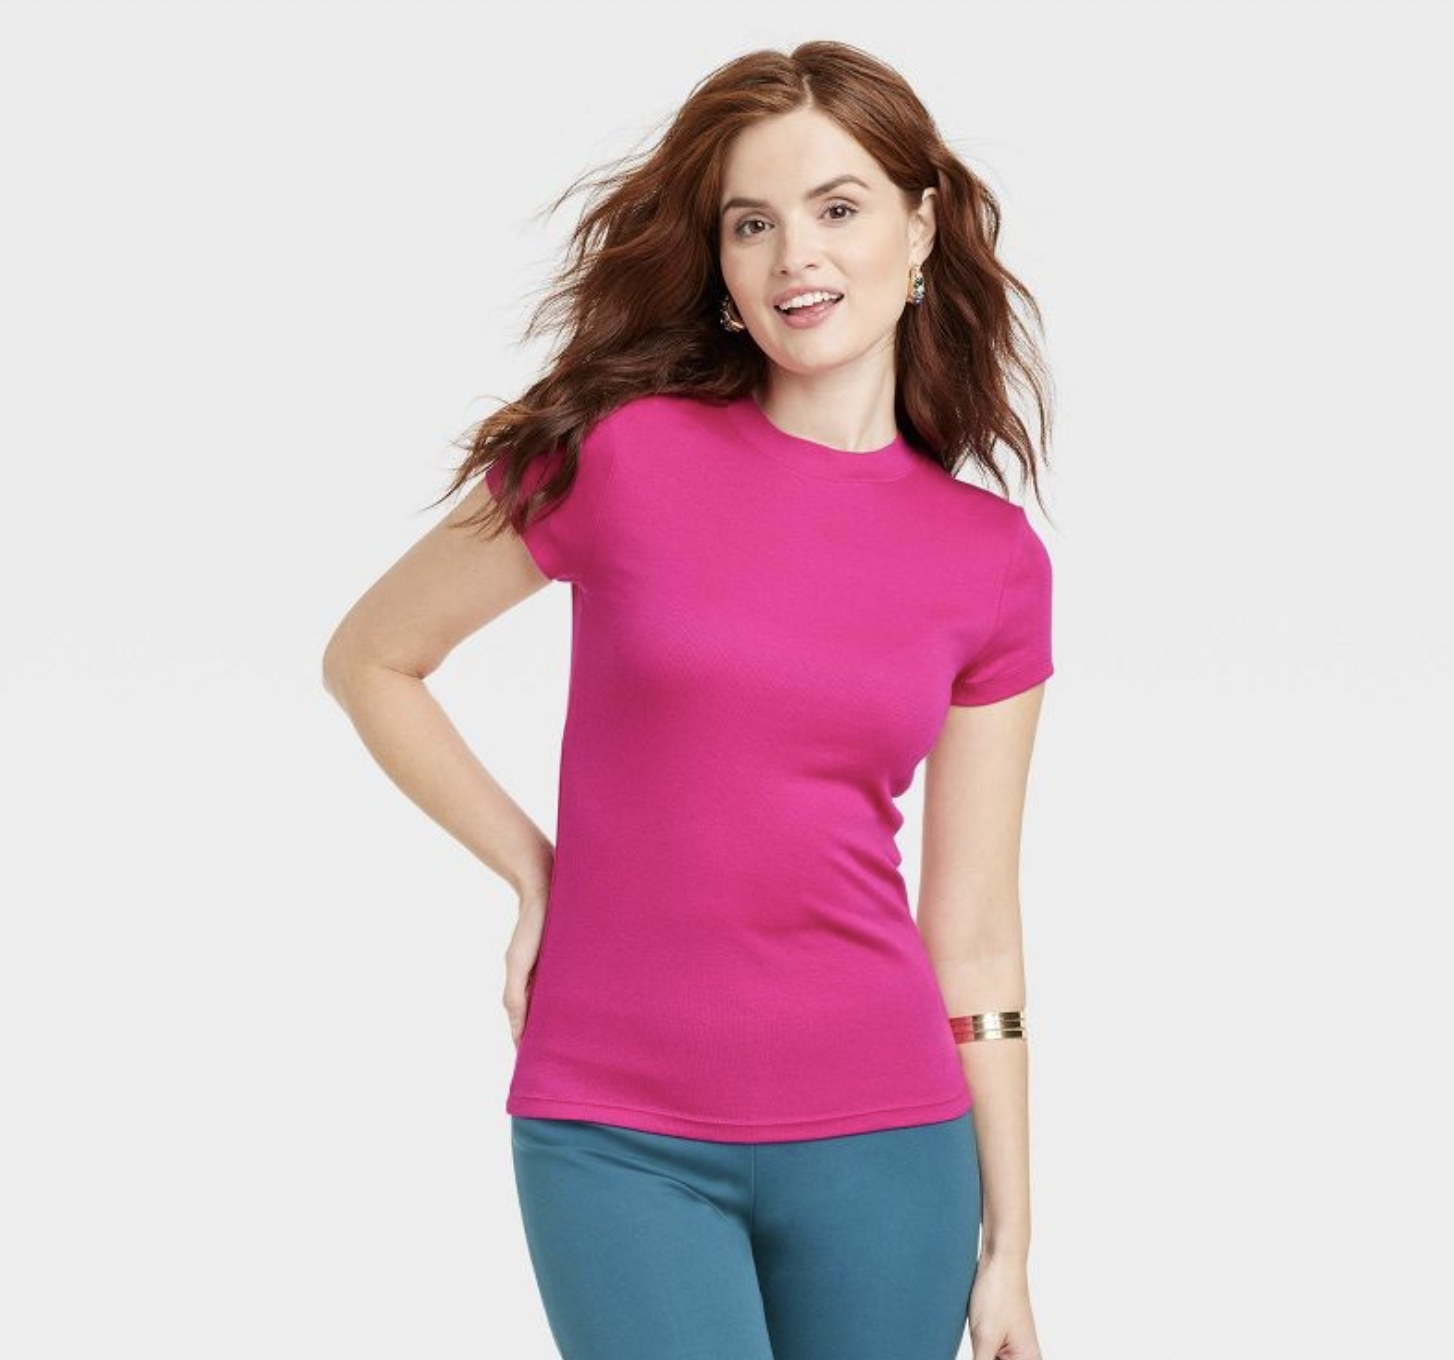 A person with long red hair wearing a hot pink shirt